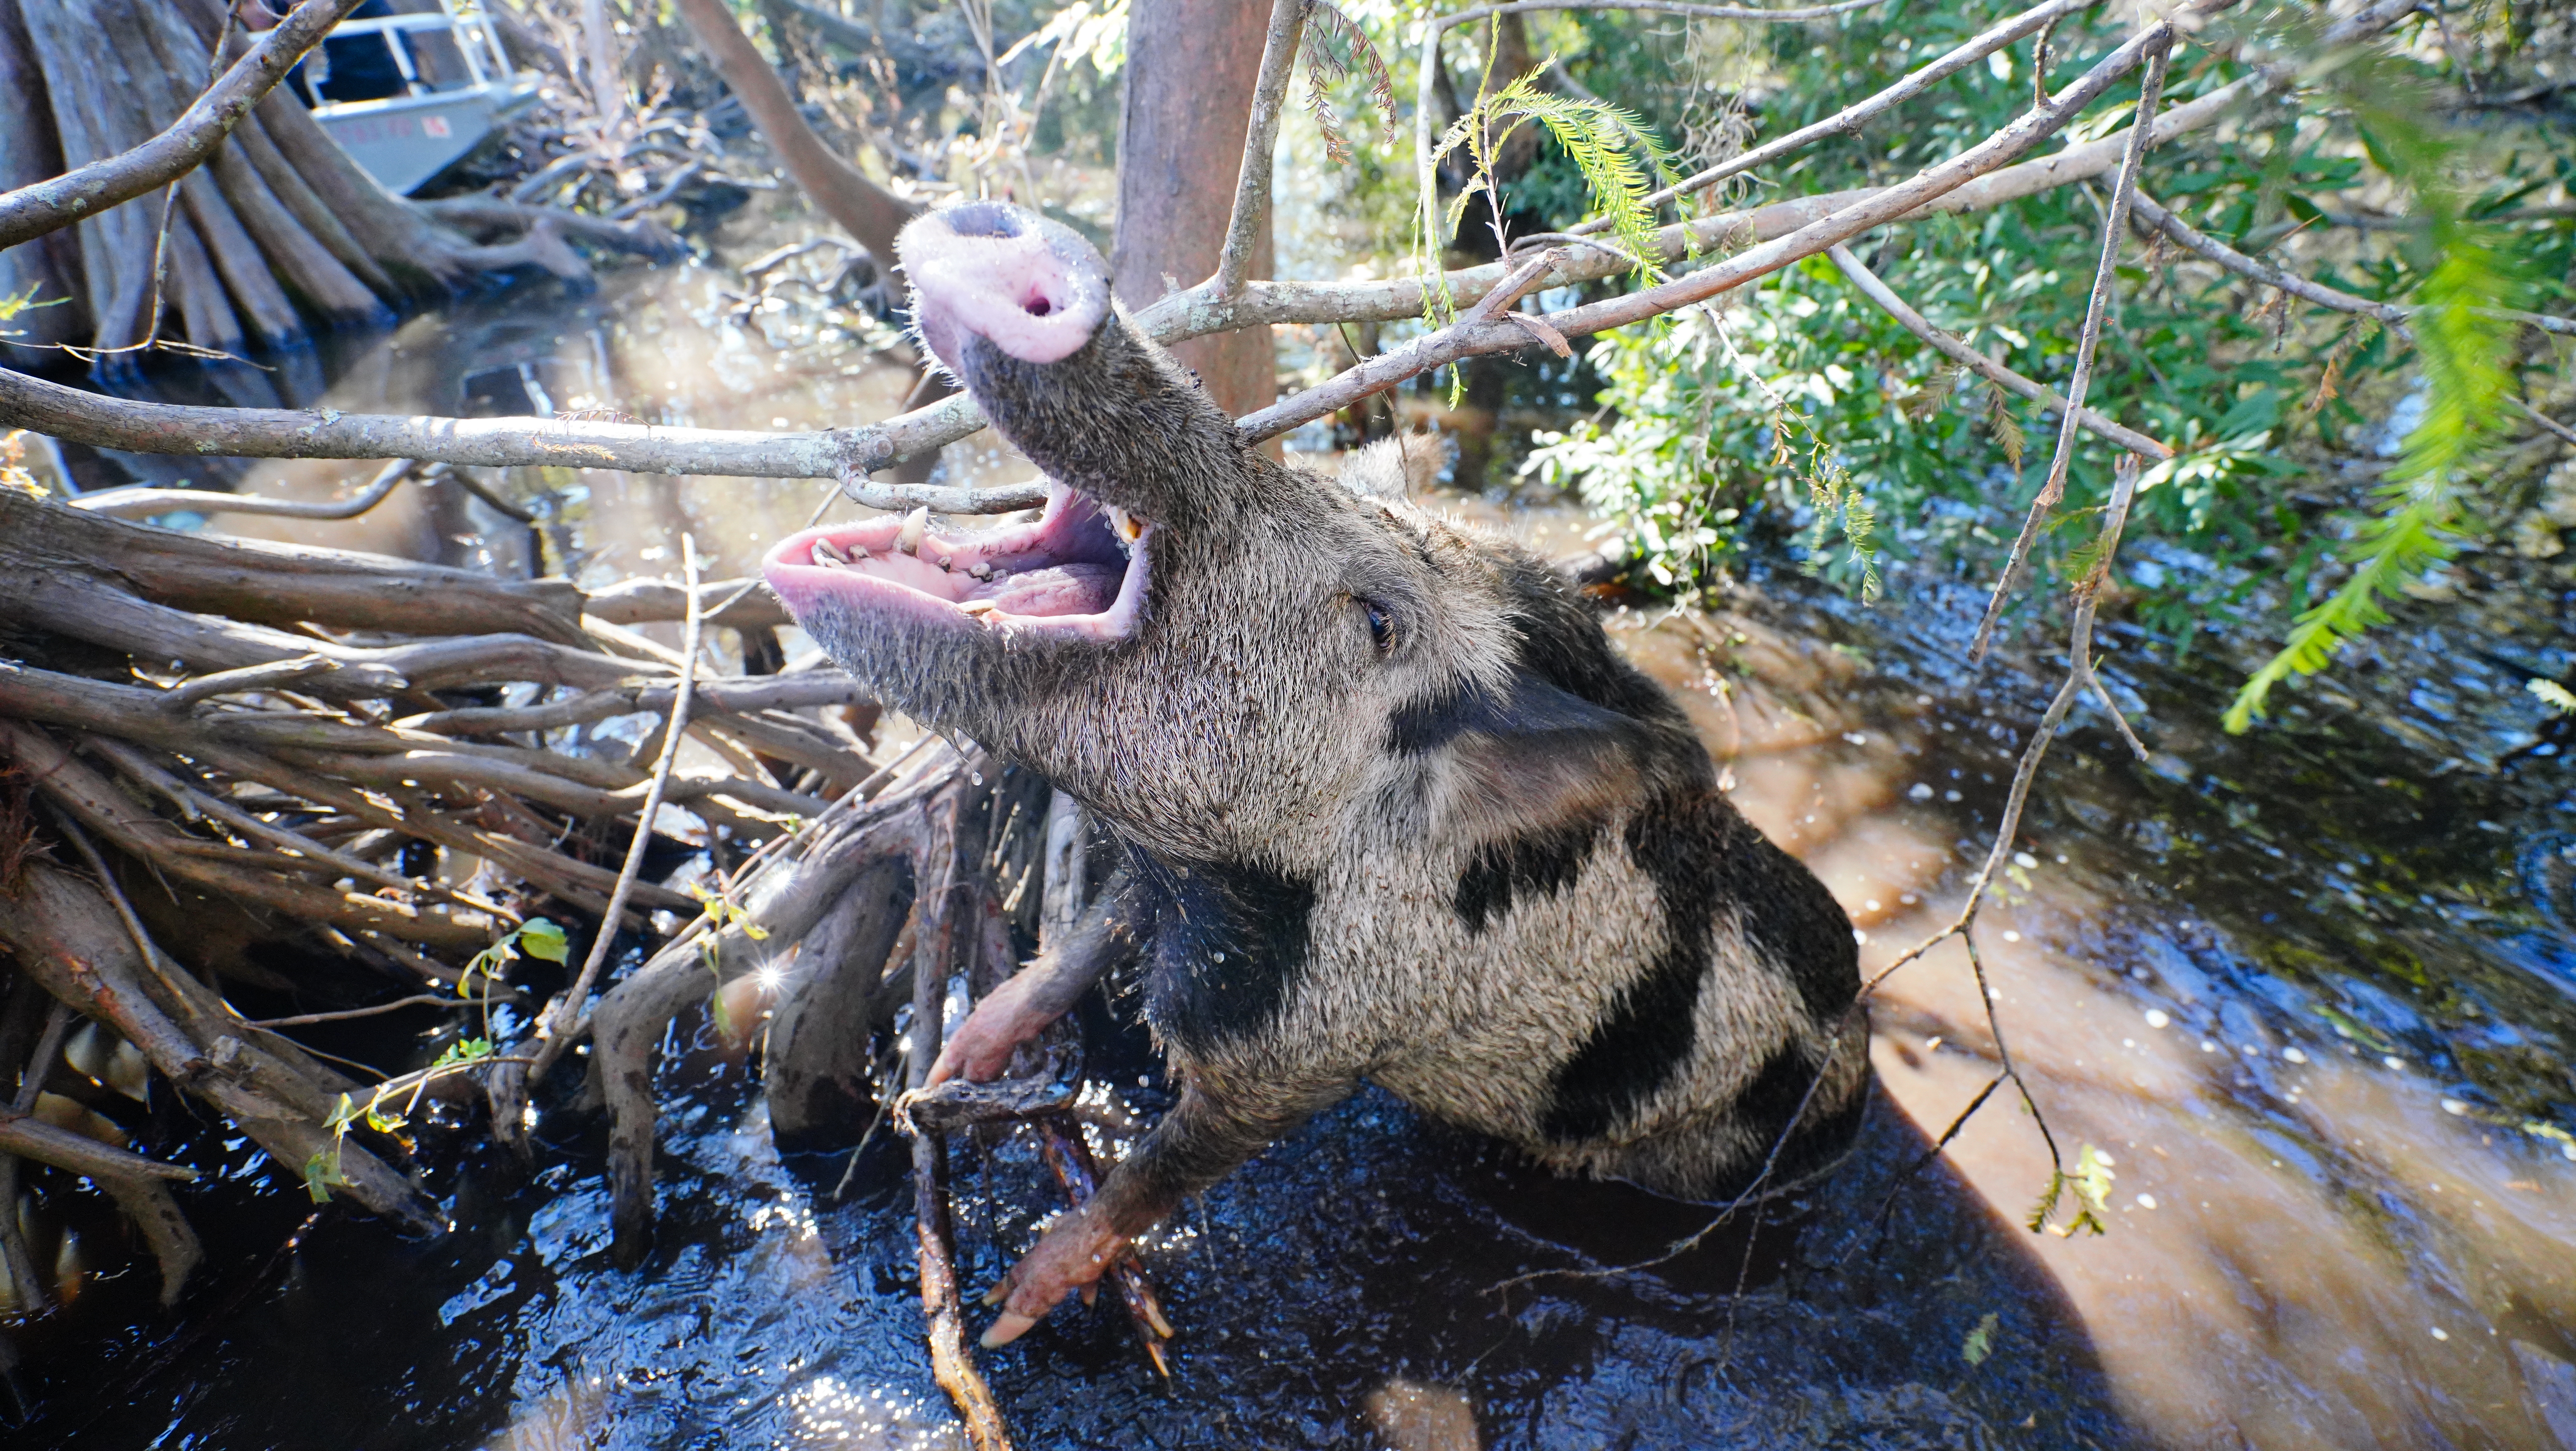 A pretty feral pig with spots begs for food in a Louisiana swamp.